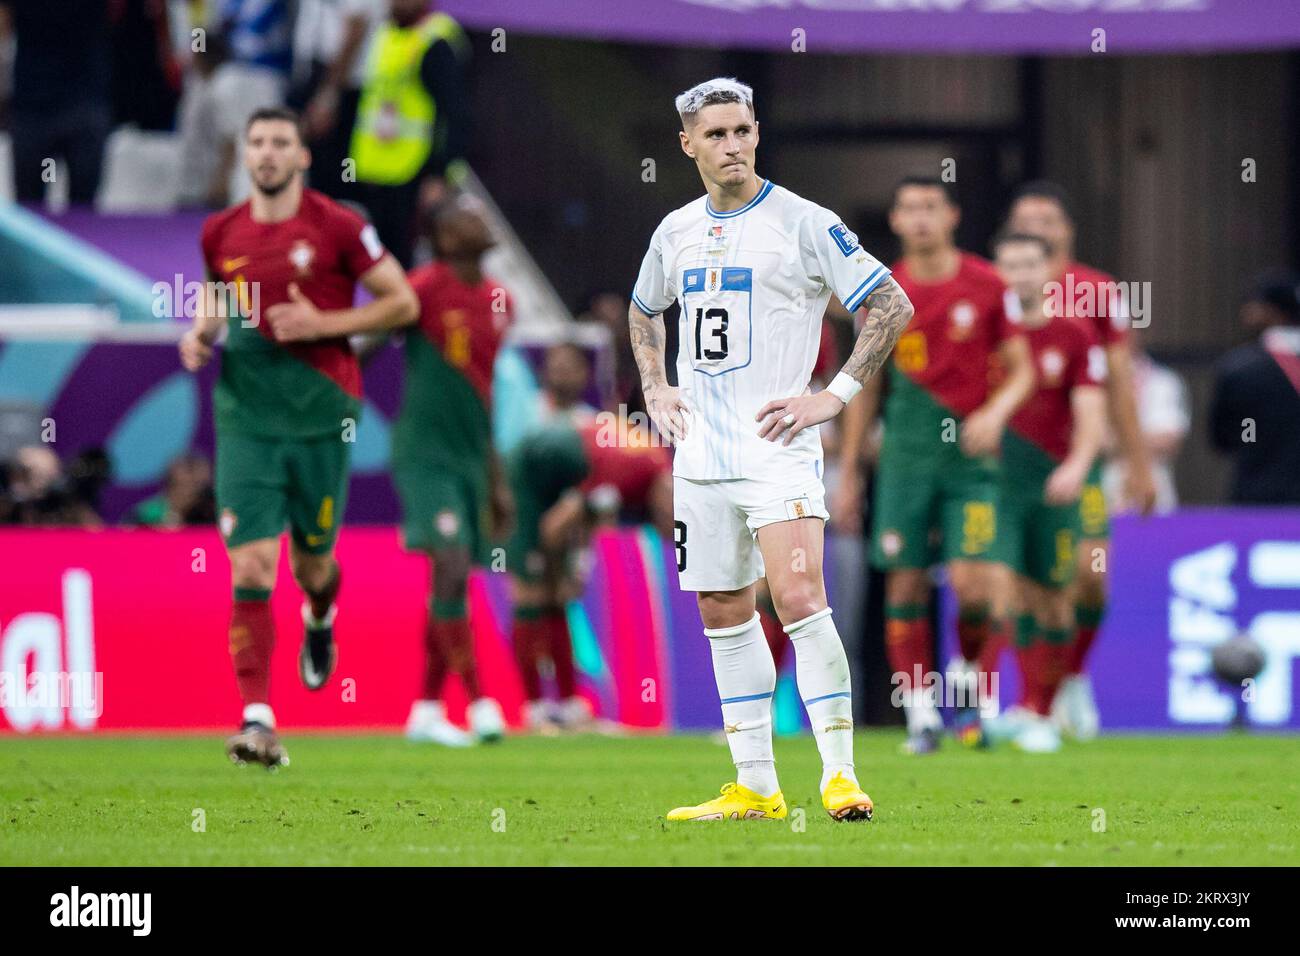 Lusail, Qatar. 28th Nov, 2022. Soccer: World Cup, Portugal - Uruguay, Preliminary round, Group H, Matchday 2, Lusail Iconic Stadium, Uruguay's Guillermo Varela reacts unhappily after scoring the goal to make it 2:0. Credit: Tom Weller/dpa/Alamy Live News Stock Photo